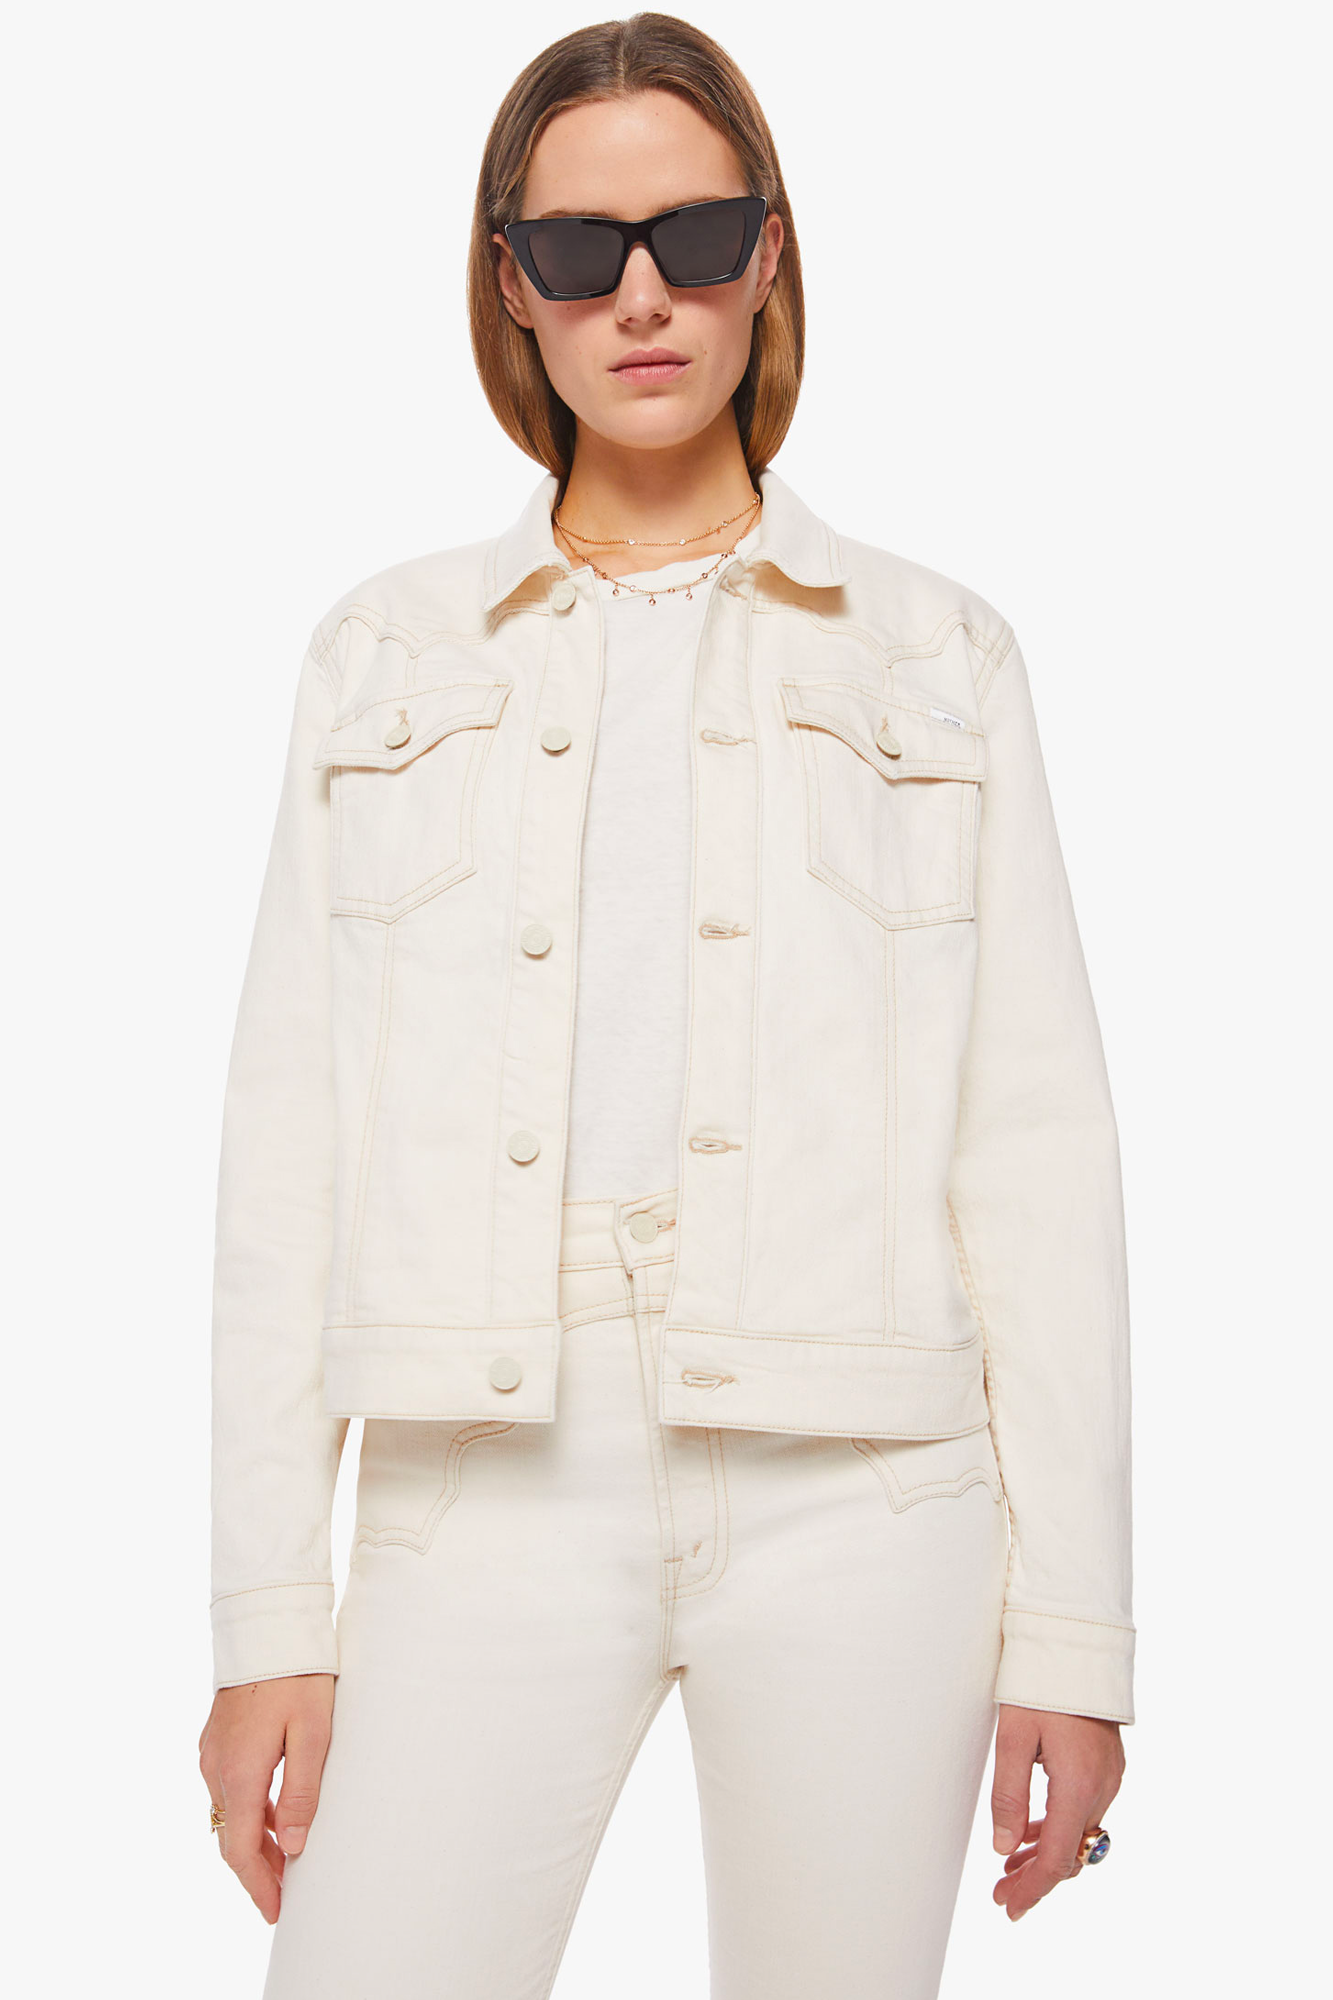 The Buckle Bunny Bruiser Jacket from Mother in Act Natural is an off white, mid season, layering piece. Wear over a Mother T-shirt or dress for going into Fall. 